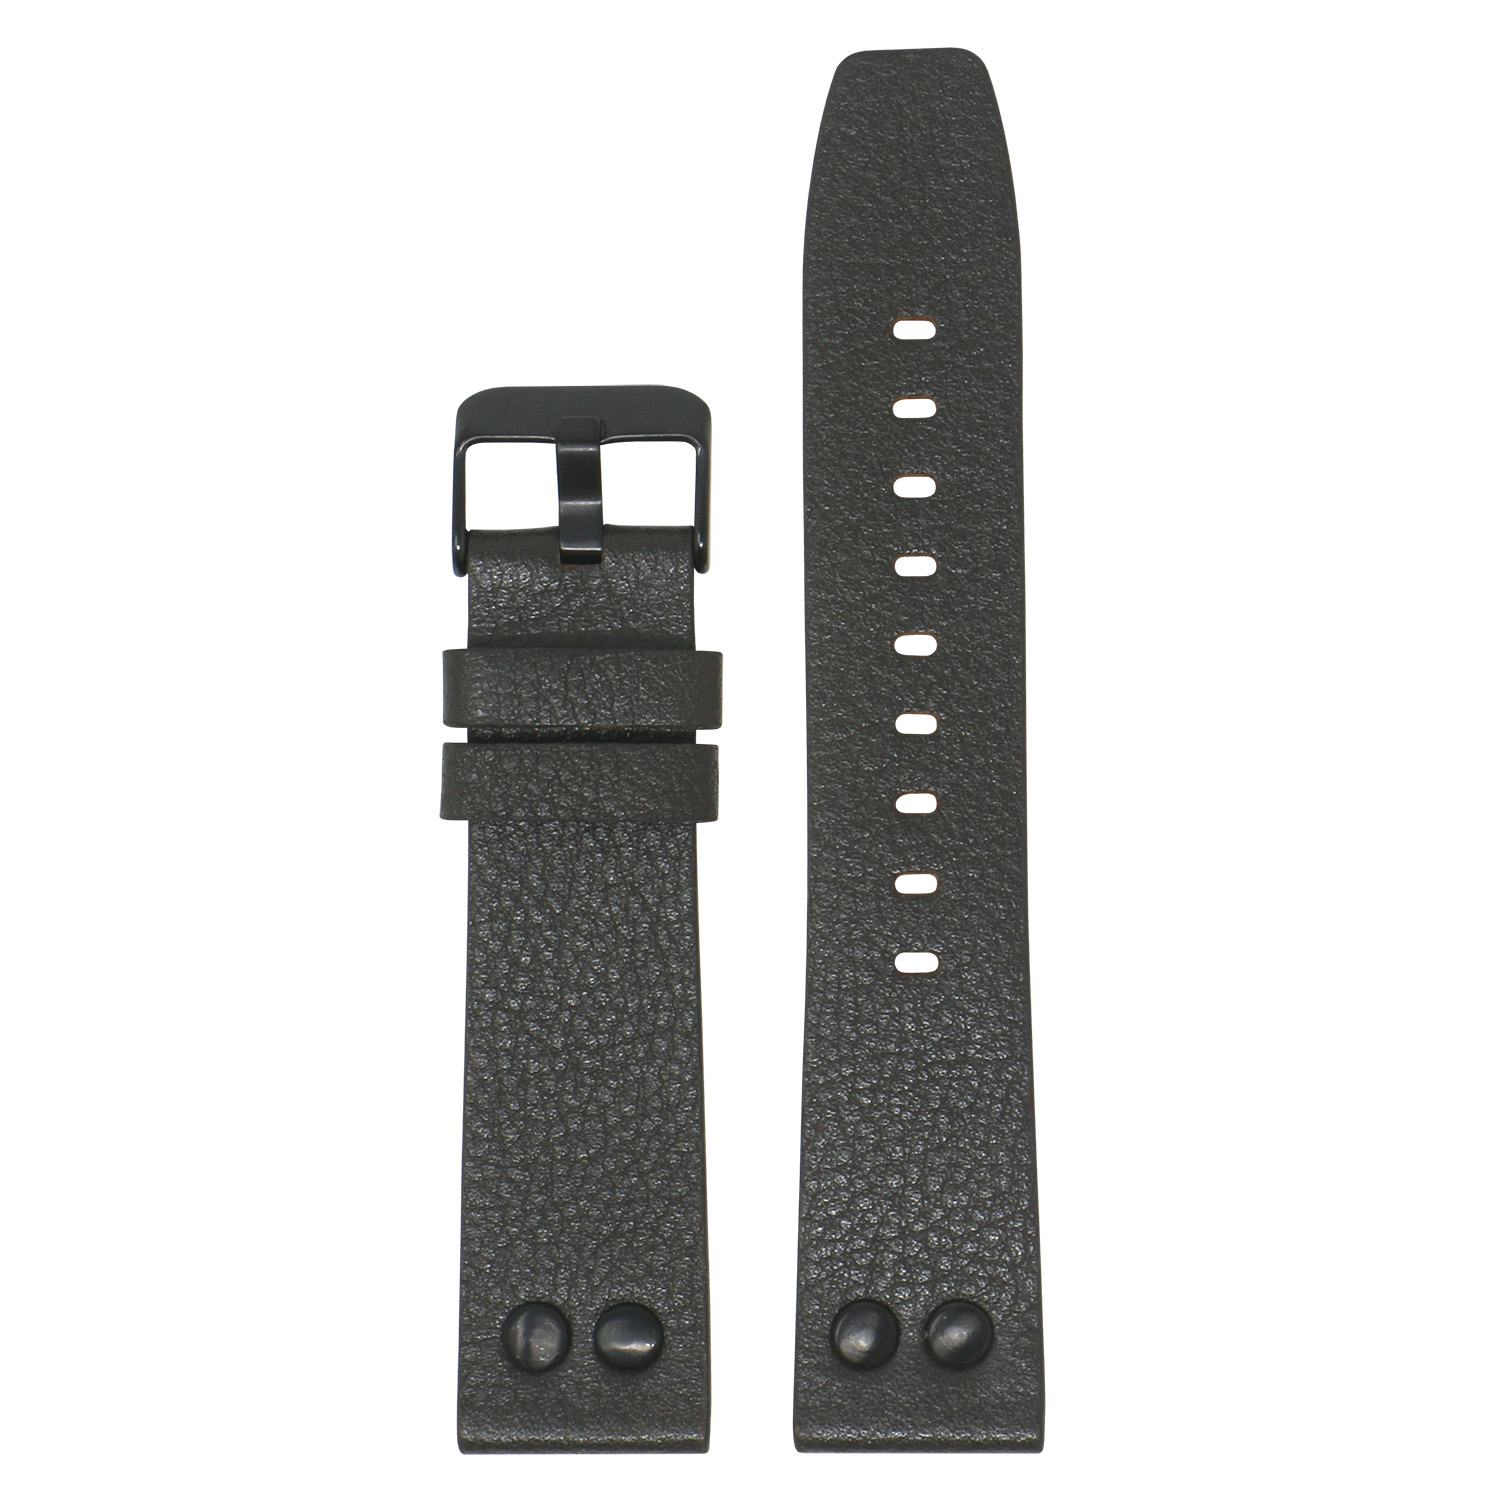 Fb.l25.2.mb Main Dark Brown StrapsCo Textured Leather Watch Band Strap With Rivets For Black Fitbit Versa 2 Lite